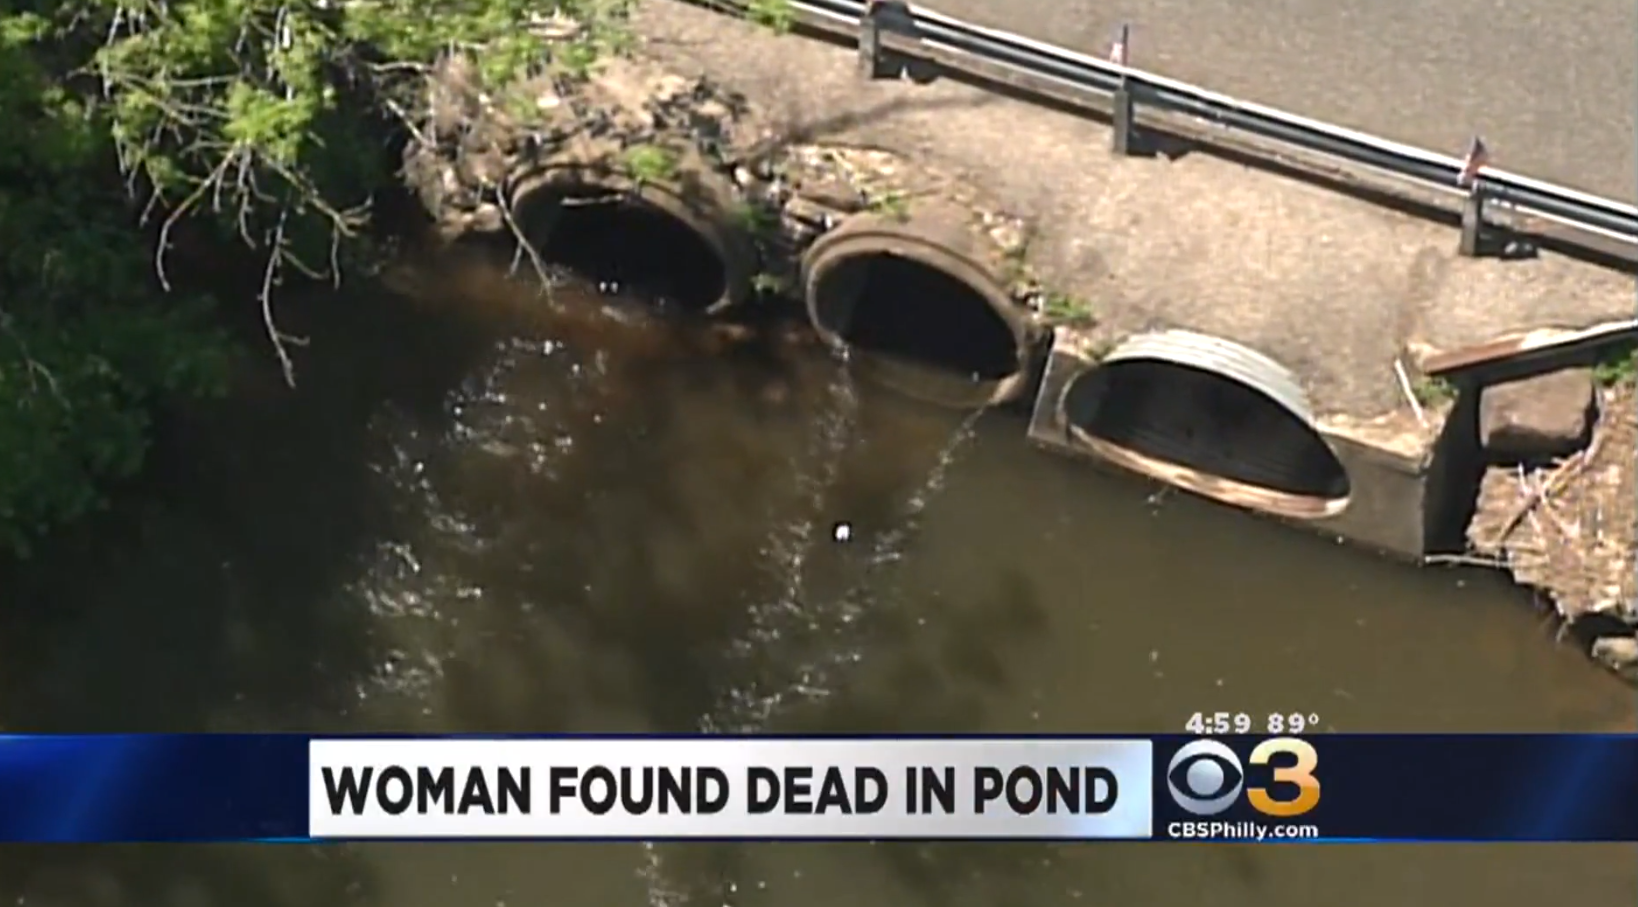 Officials Unidentified Womans Body Found Tied To Cinder Block In Pennsylvania Pond Cbs News